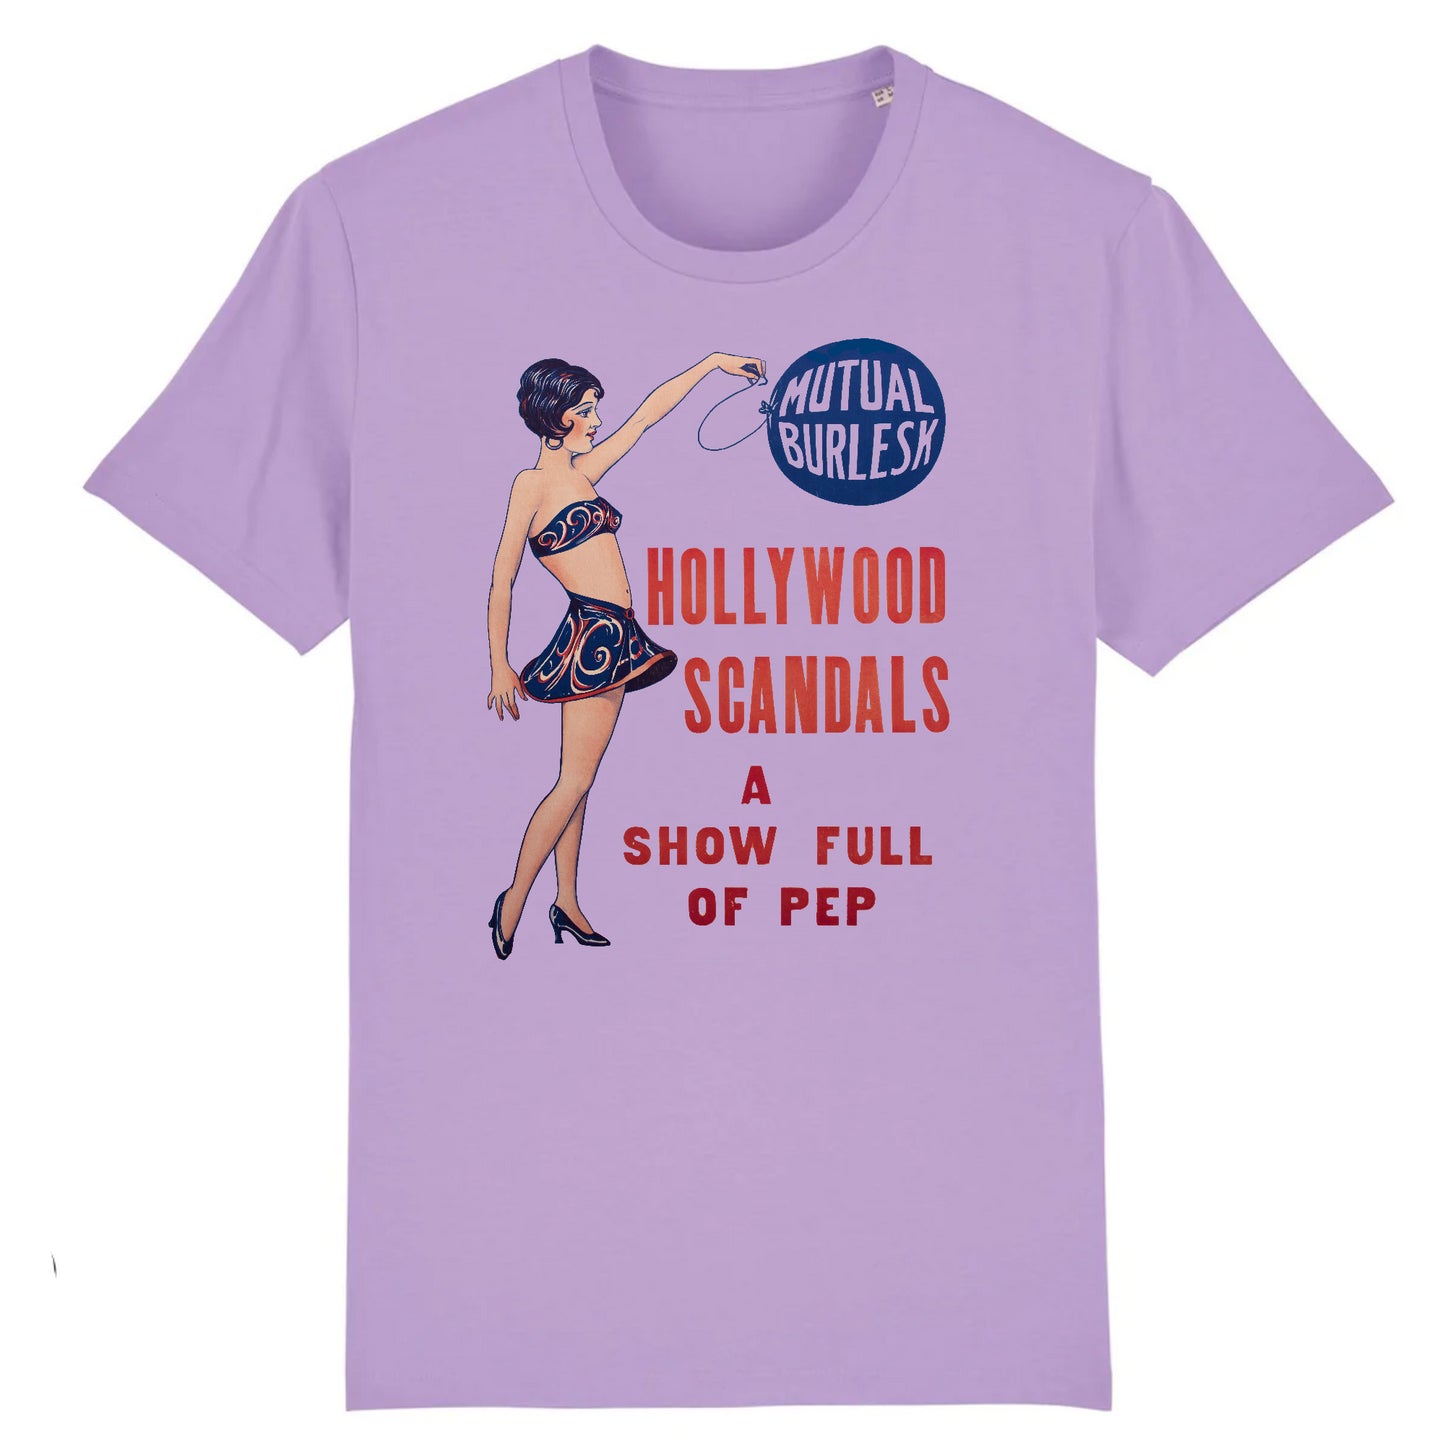 Hollywood Scandals Mutual Burlesque Window Card Poster, 1926 - Organic Cotton T-Shirt